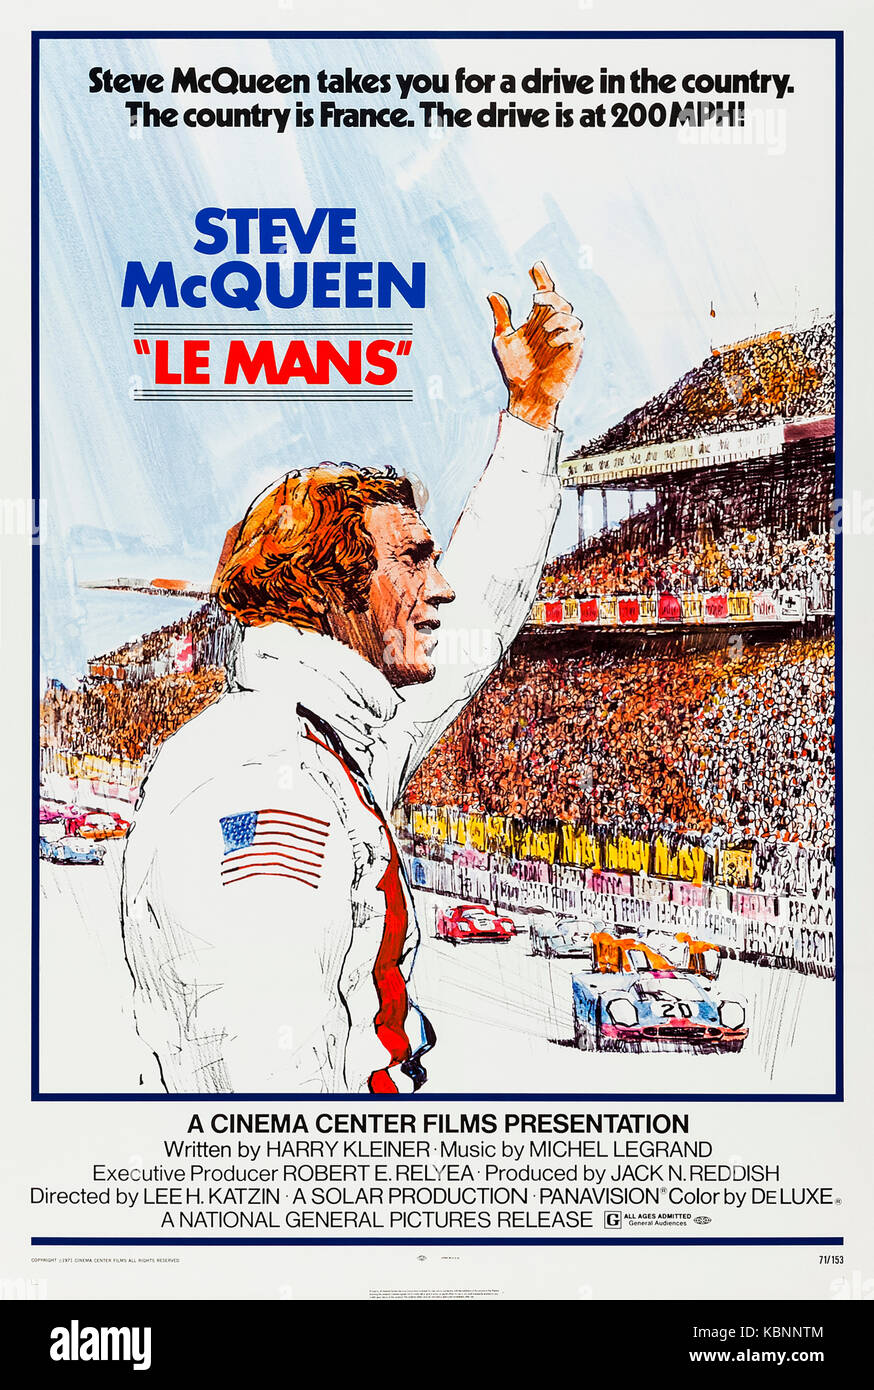 Le Mans (1971) directed by Lee H. Katzin and starring Steve McQueen, Siegfried Rauch and Elga Andersen. McQueen plays American Michael Delaney in Gulf Team Porsche 917 in a duel with German Erich Stahler in Ferrari 512LM in the annual 24-hour Grand Prix race at the 1970 Le Mans, France. Stock Photo